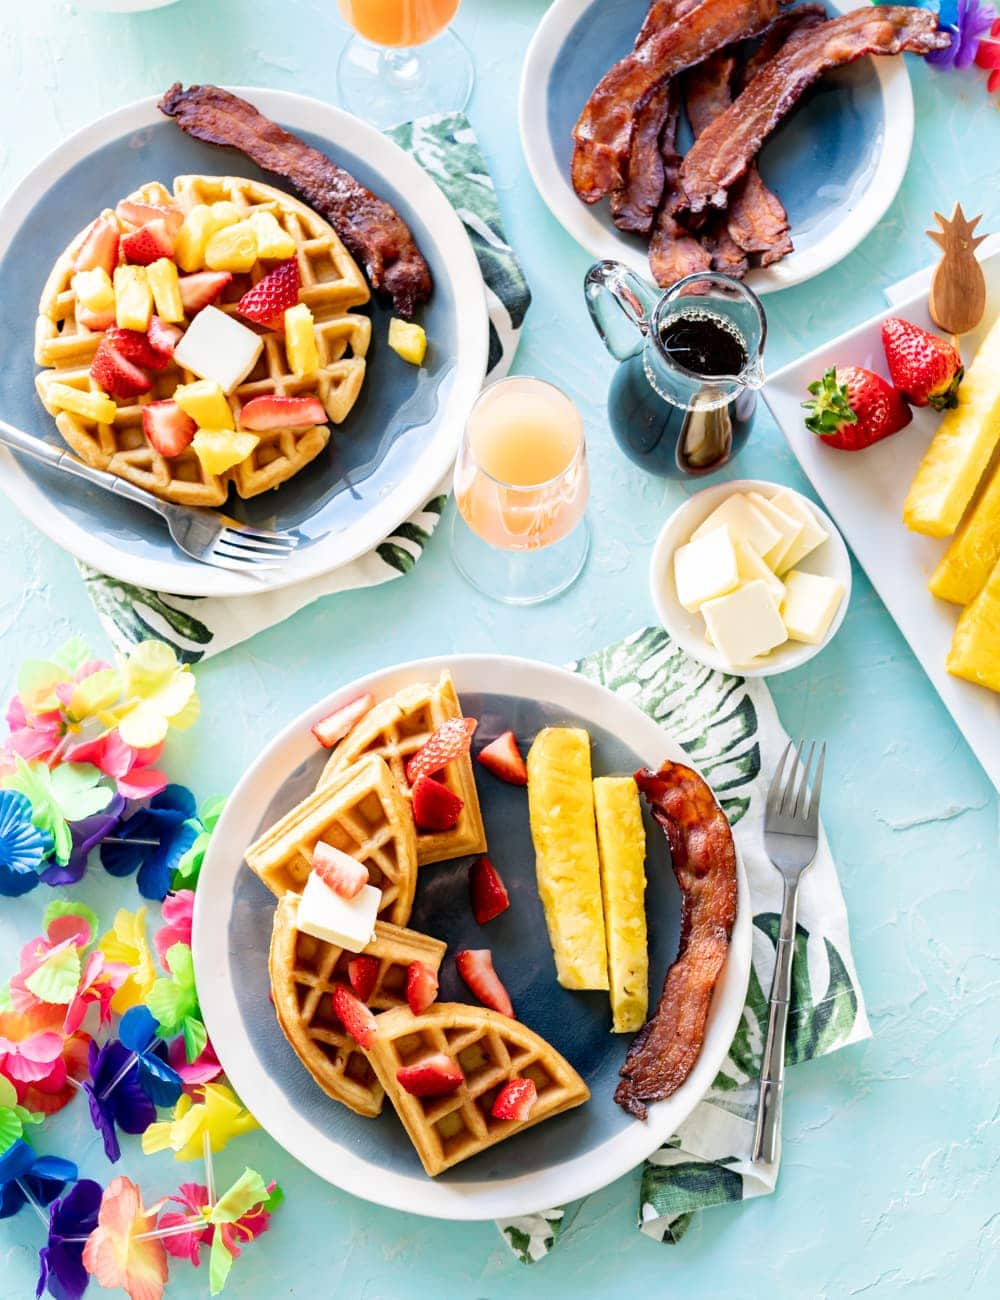 coconut mochi waffles on blue plates with pineapple spears, pieces of cooked bacon, glass with mimosa cocktail in it, glass syrup bottle, rainbow Hawaiian lei on table